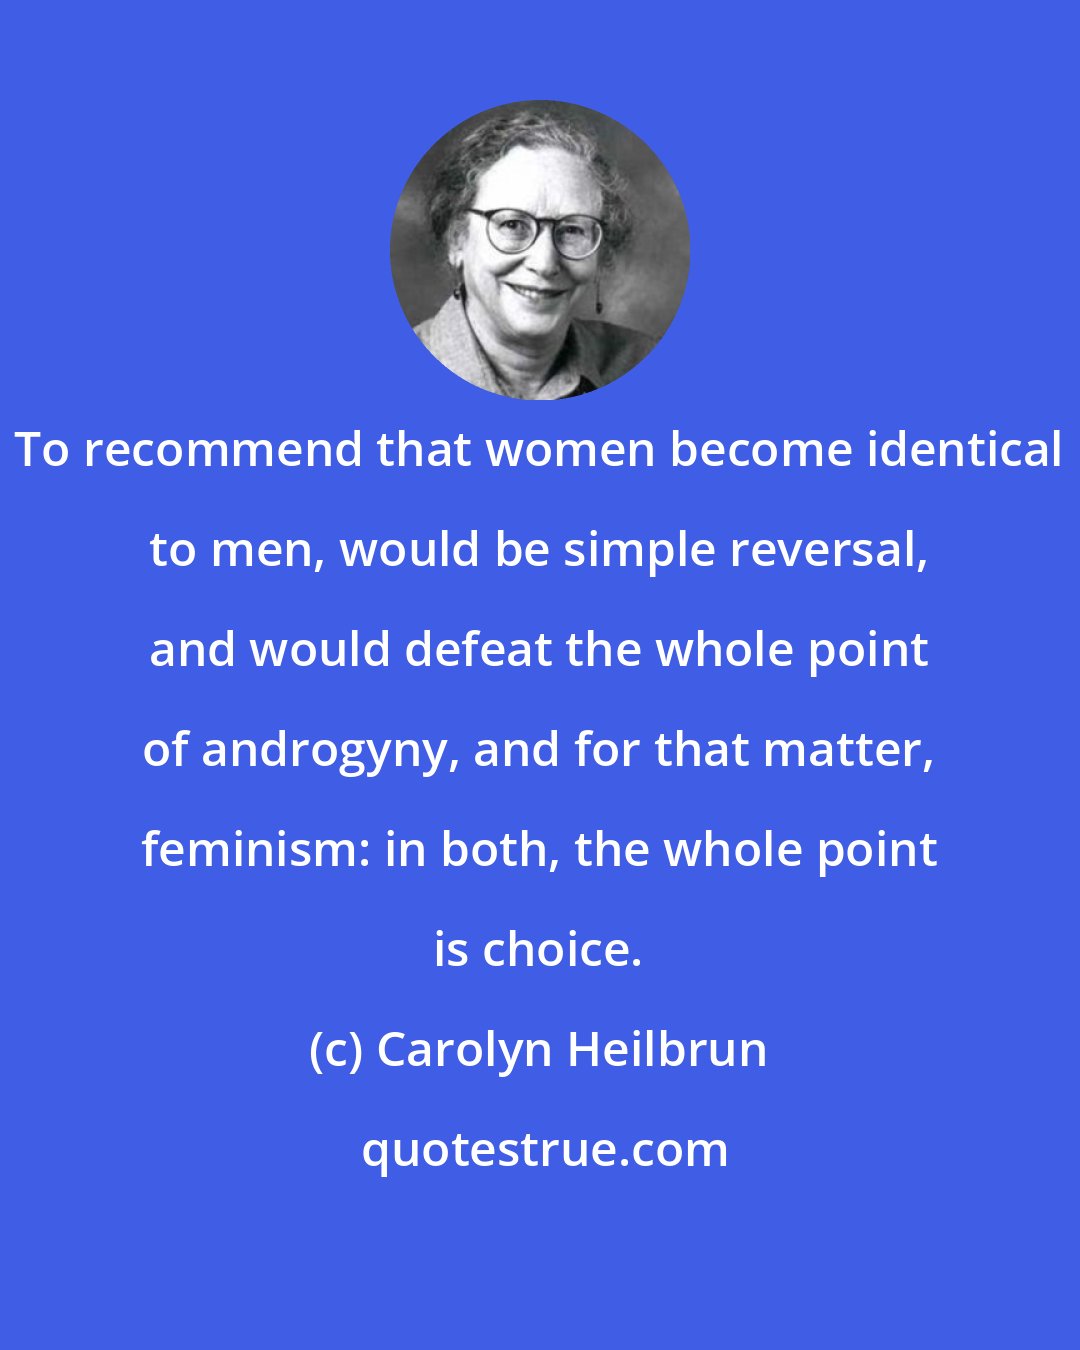 Carolyn Heilbrun: To recommend that women become identical to men, would be simple reversal, and would defeat the whole point of androgyny, and for that matter, feminism: in both, the whole point is choice.